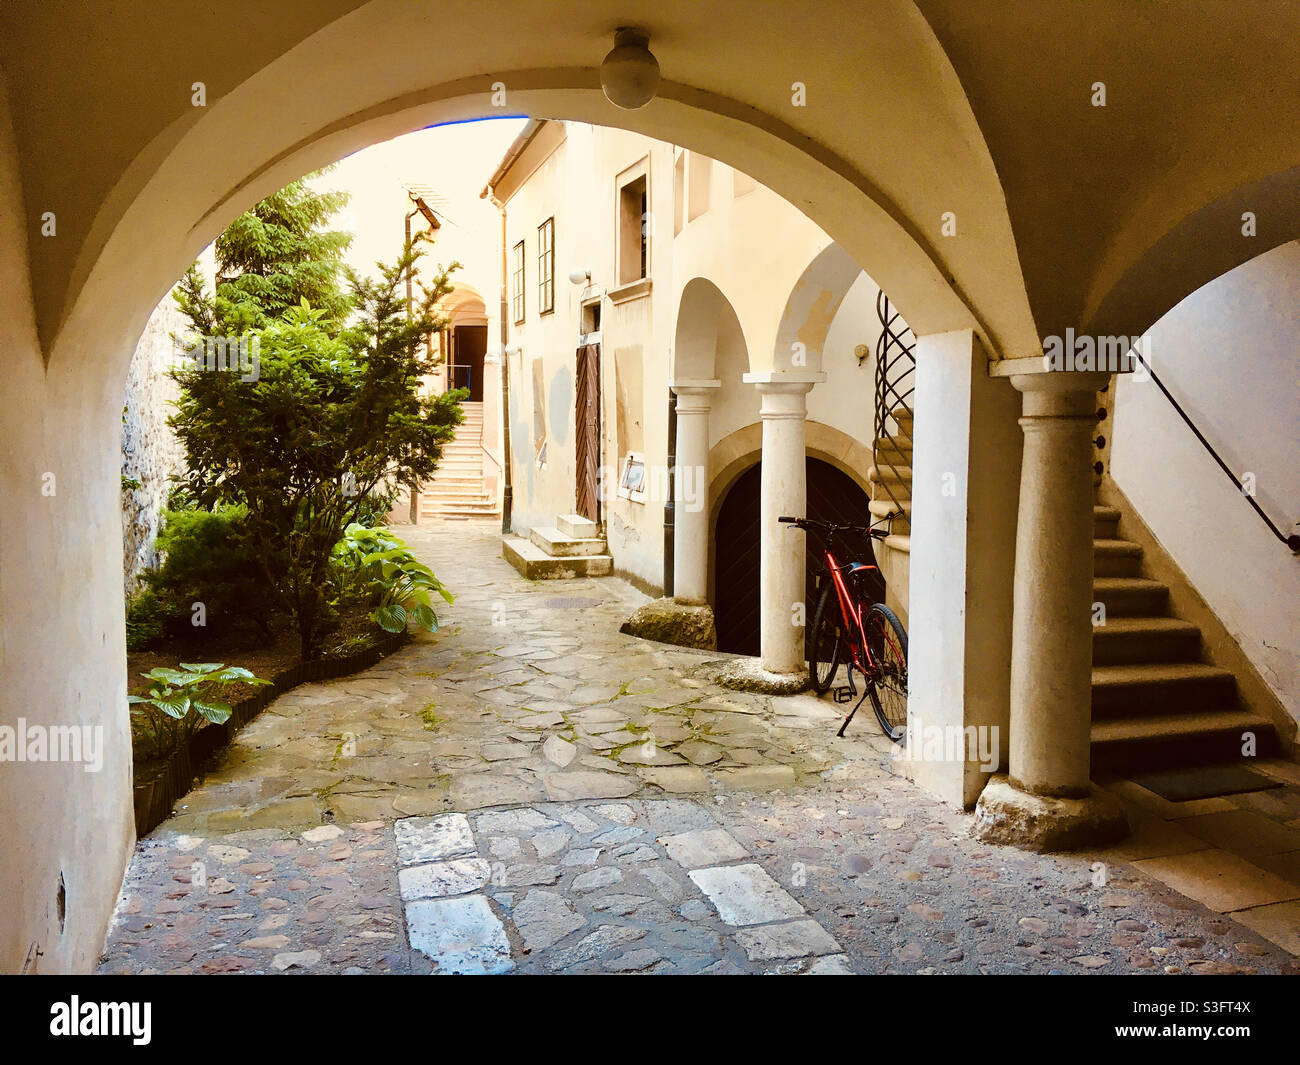 Medieval house inner courtyard, arches supported with columns, Varkerulet, Sopron, Hungary Stock Photo